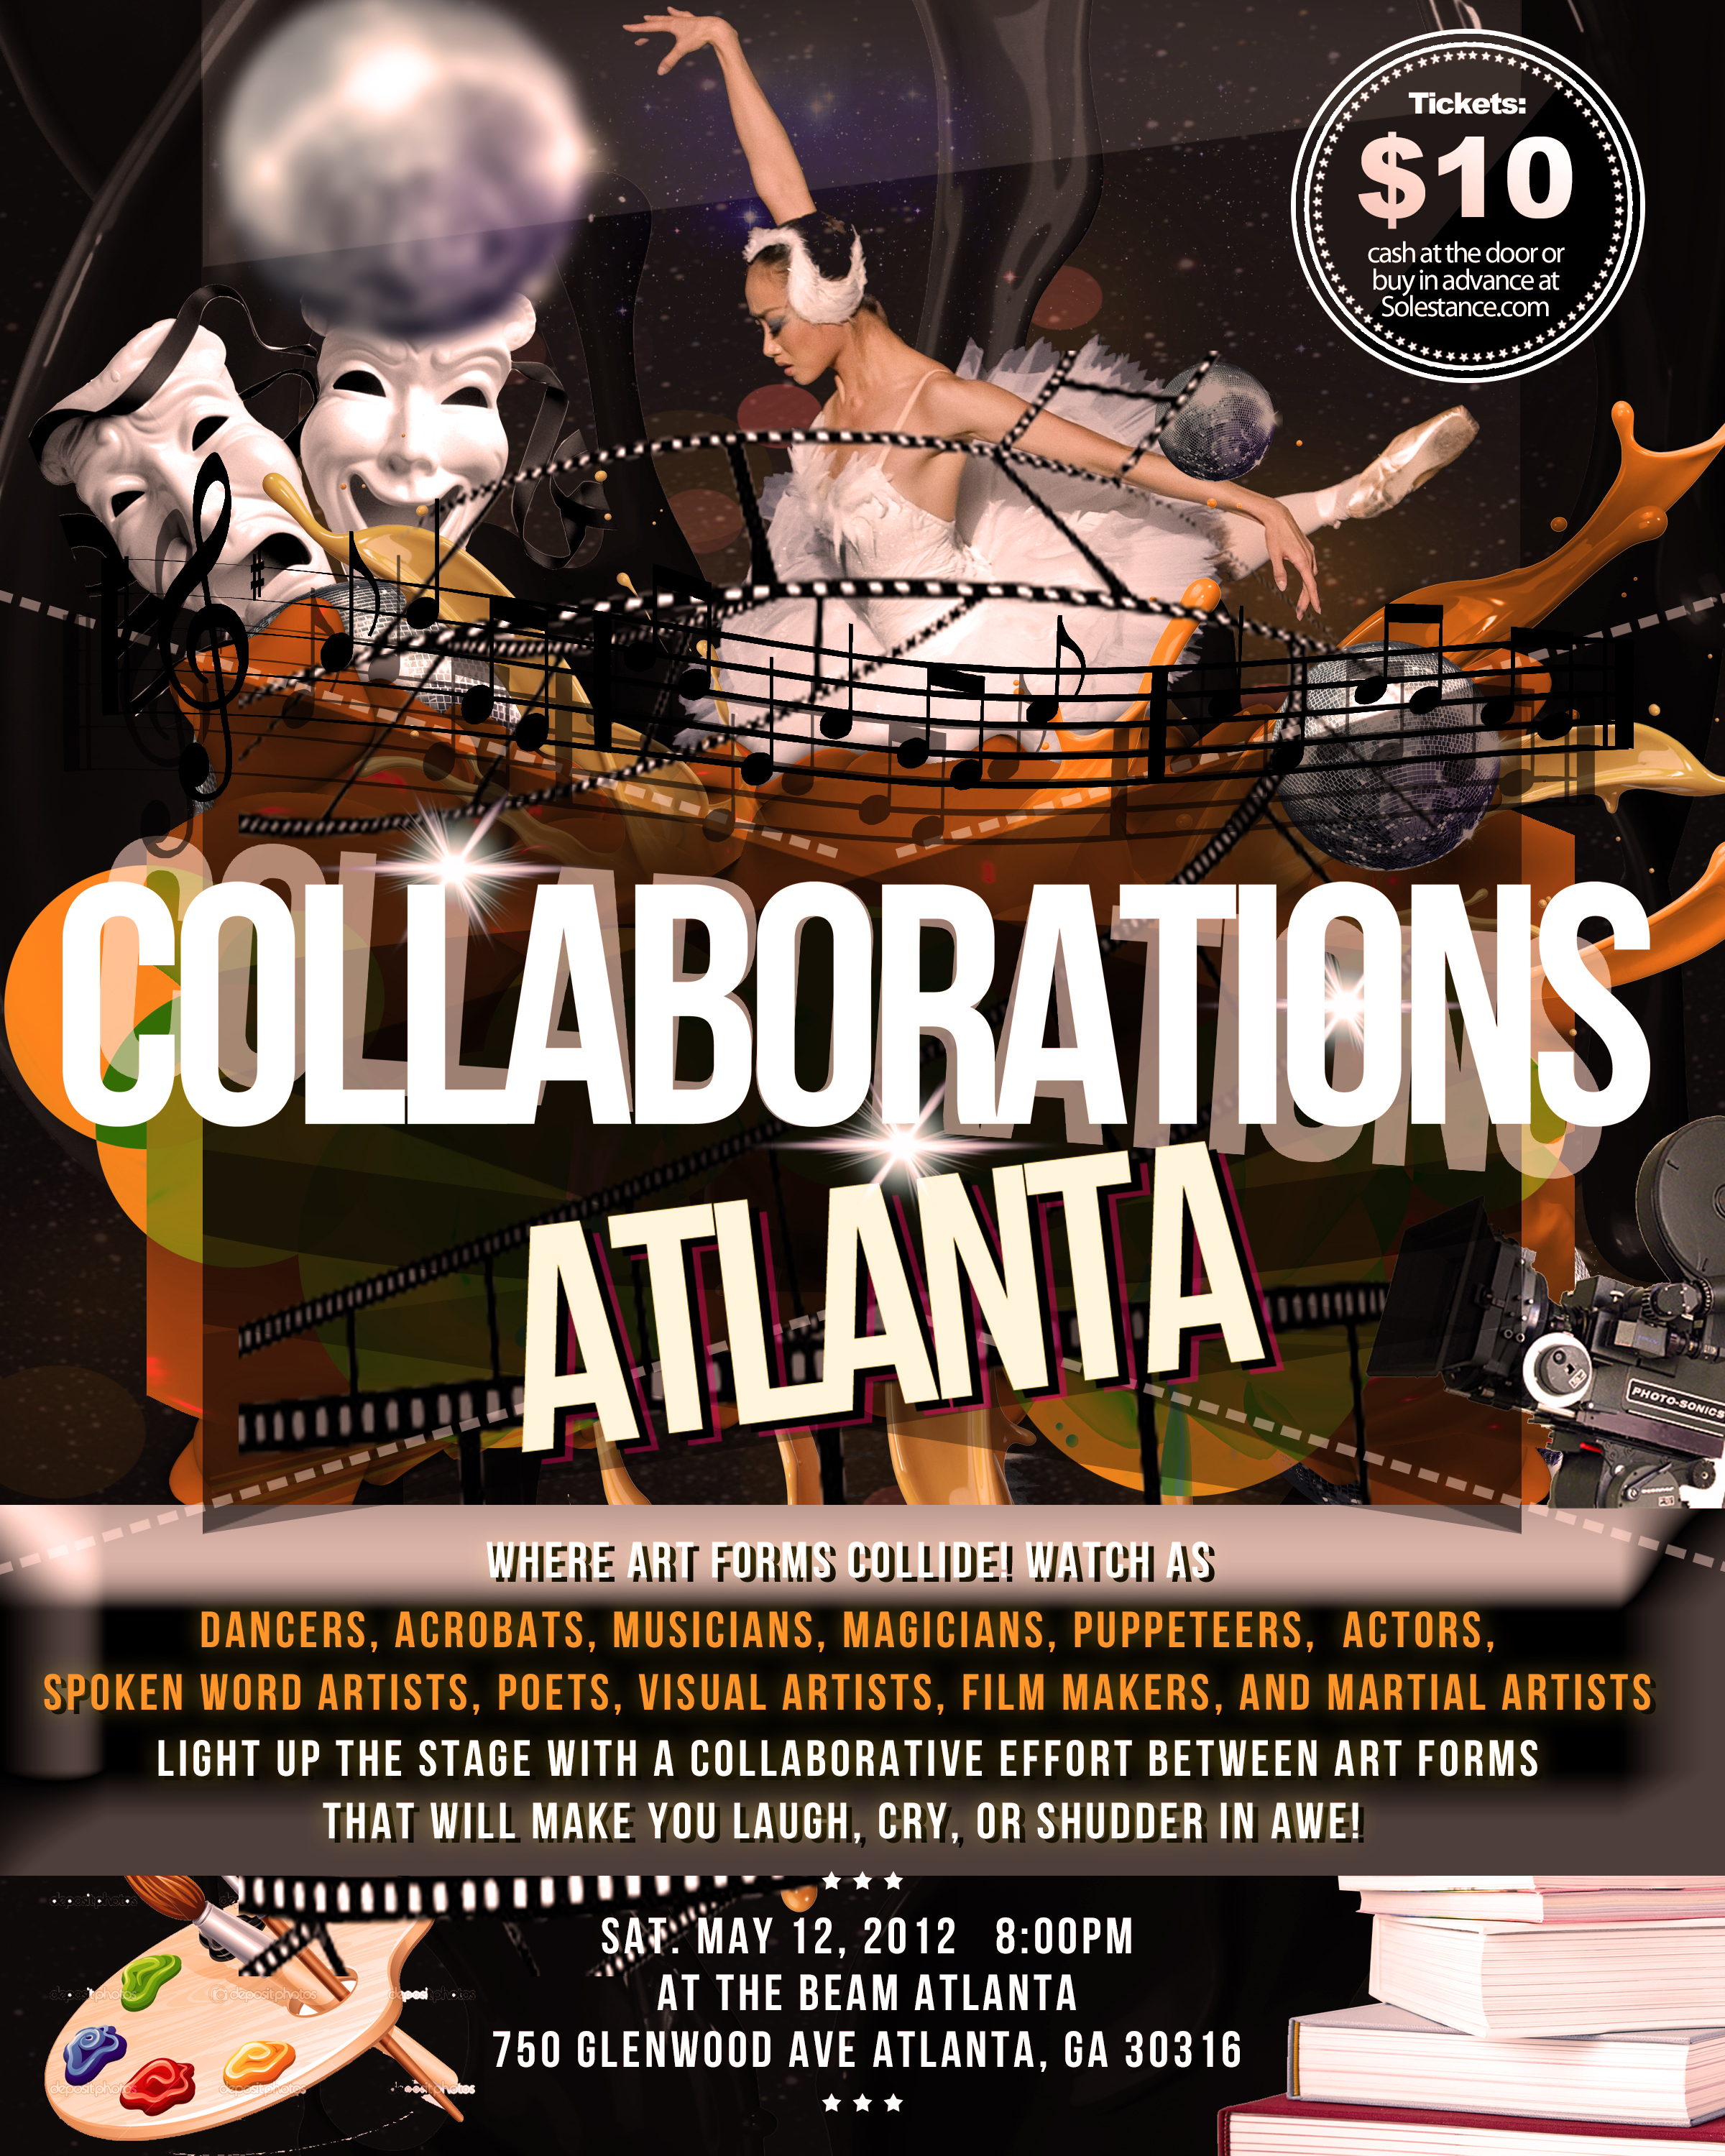 Poster for Collaborations Atlanta, featuring 